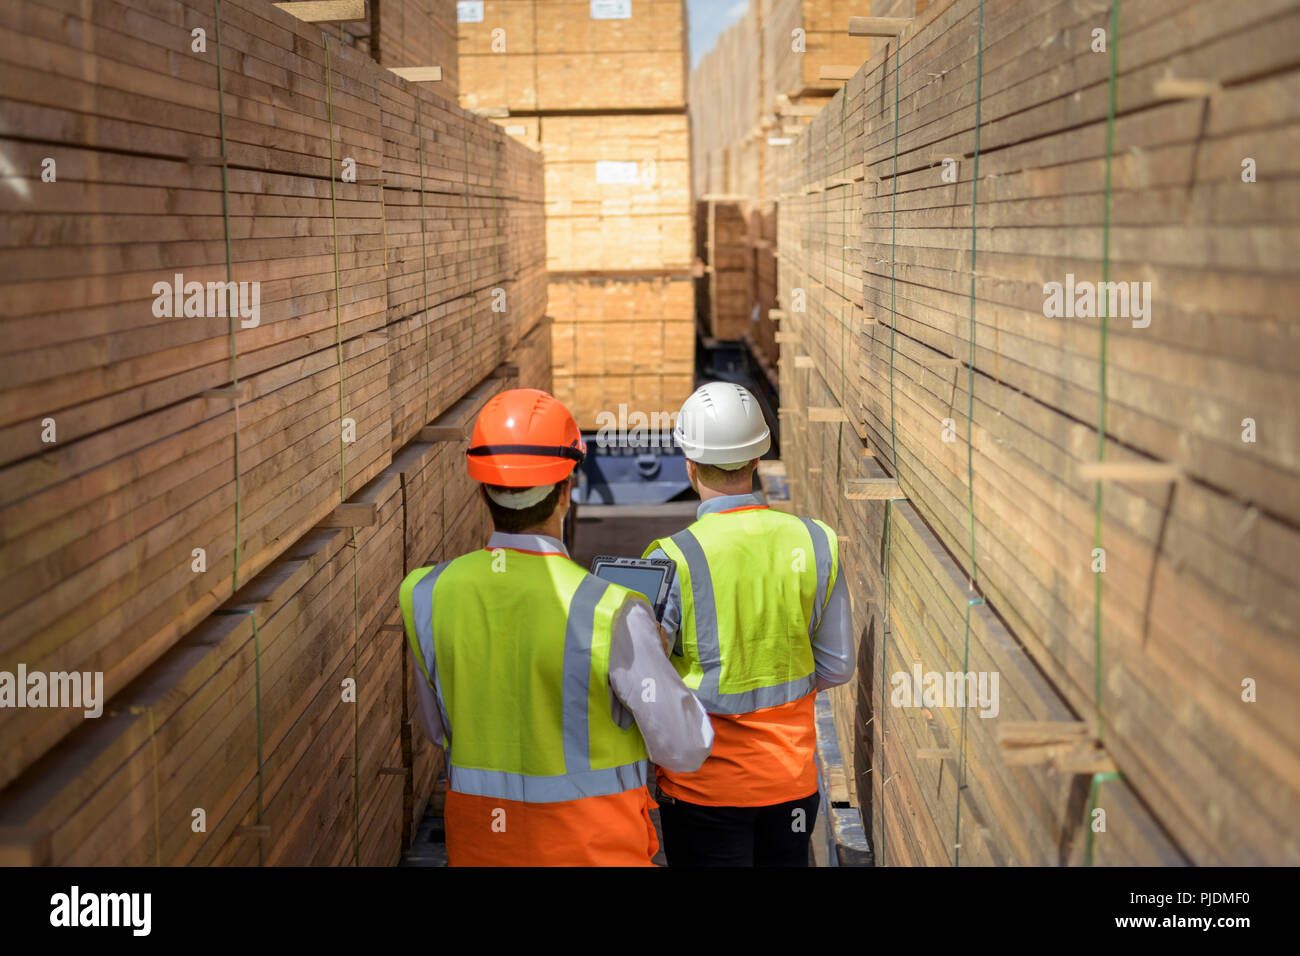 Workers among stacks of timber in storage at port Stock Photo